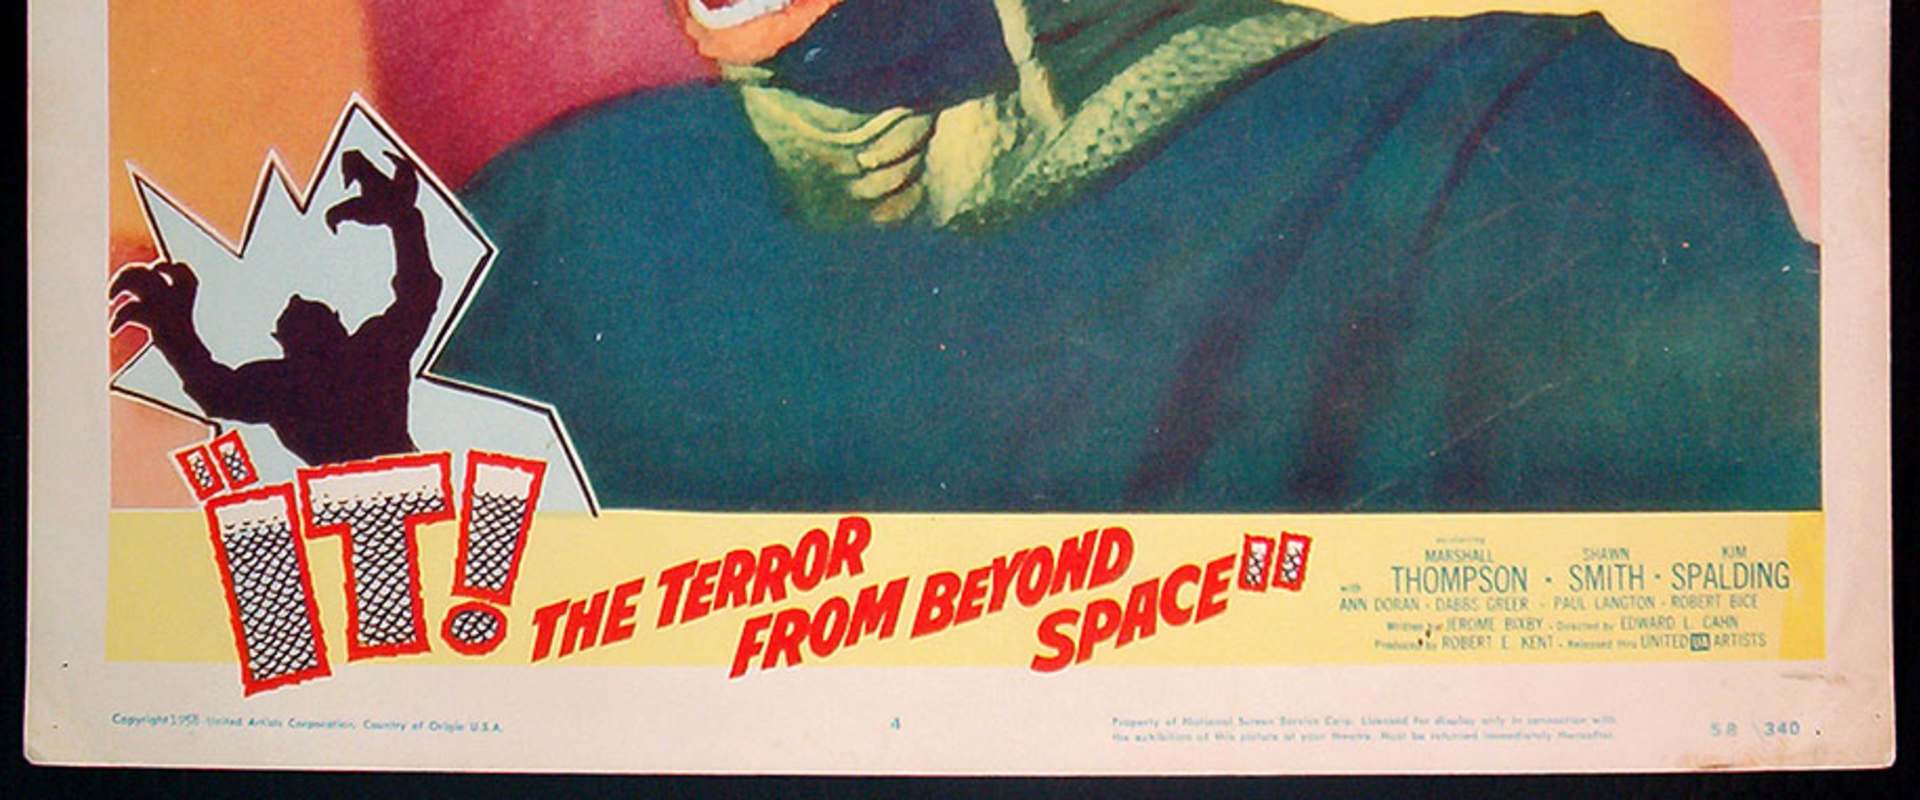 It! The Terror from Beyond Space background 1